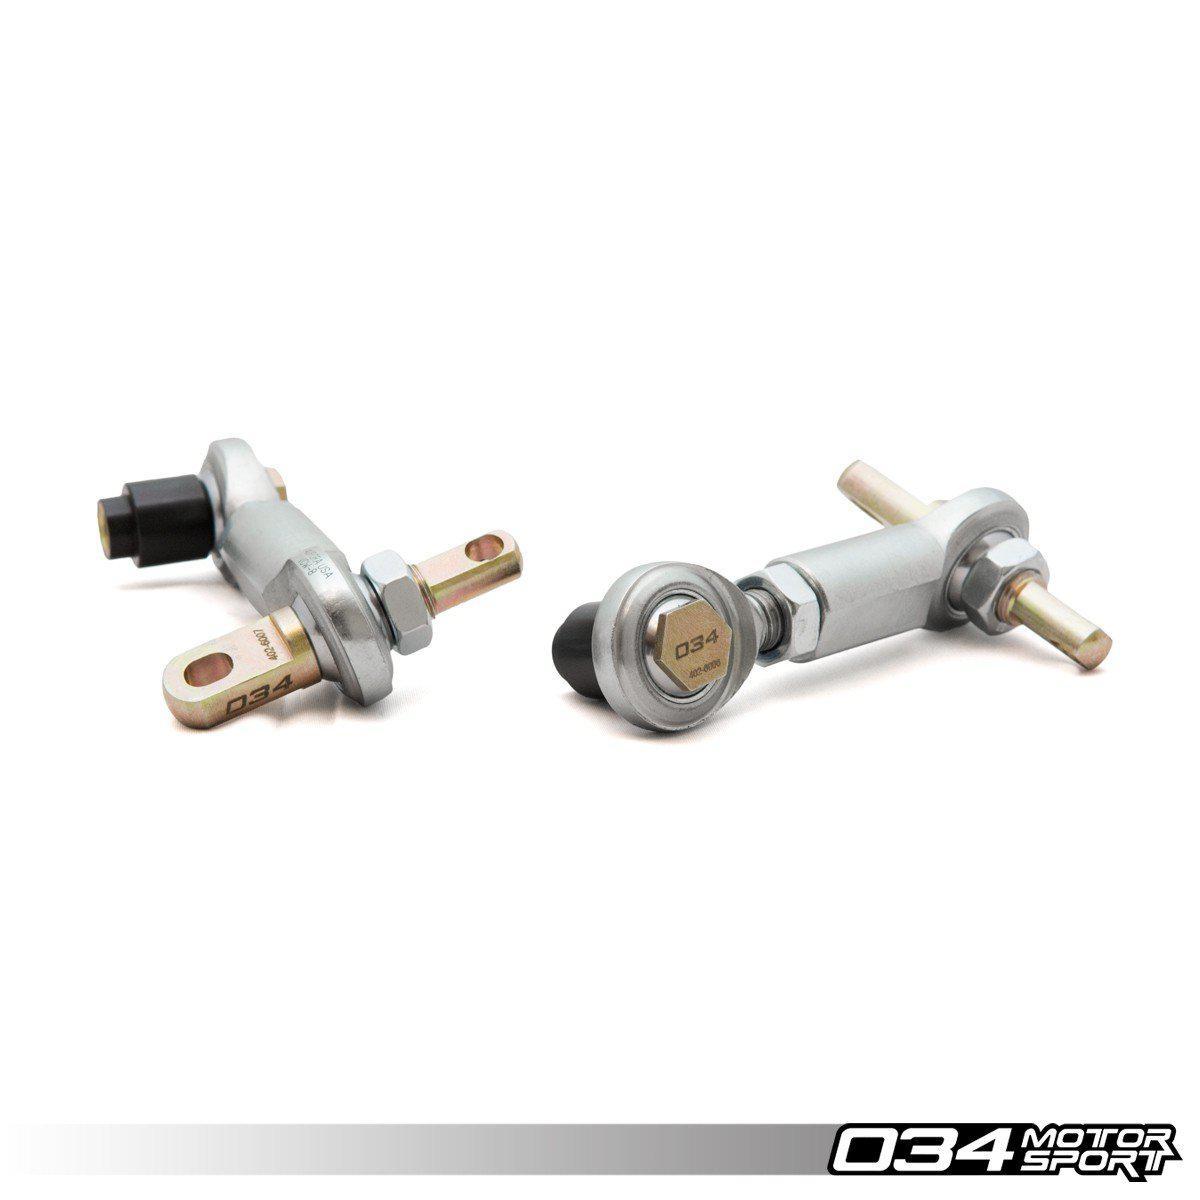 Sway Bar End Links, Motorsport, Rear, Adjustable, B6/B7 Audi A4/S4/RS4 Quattro & FWD-A Little Tuning Co